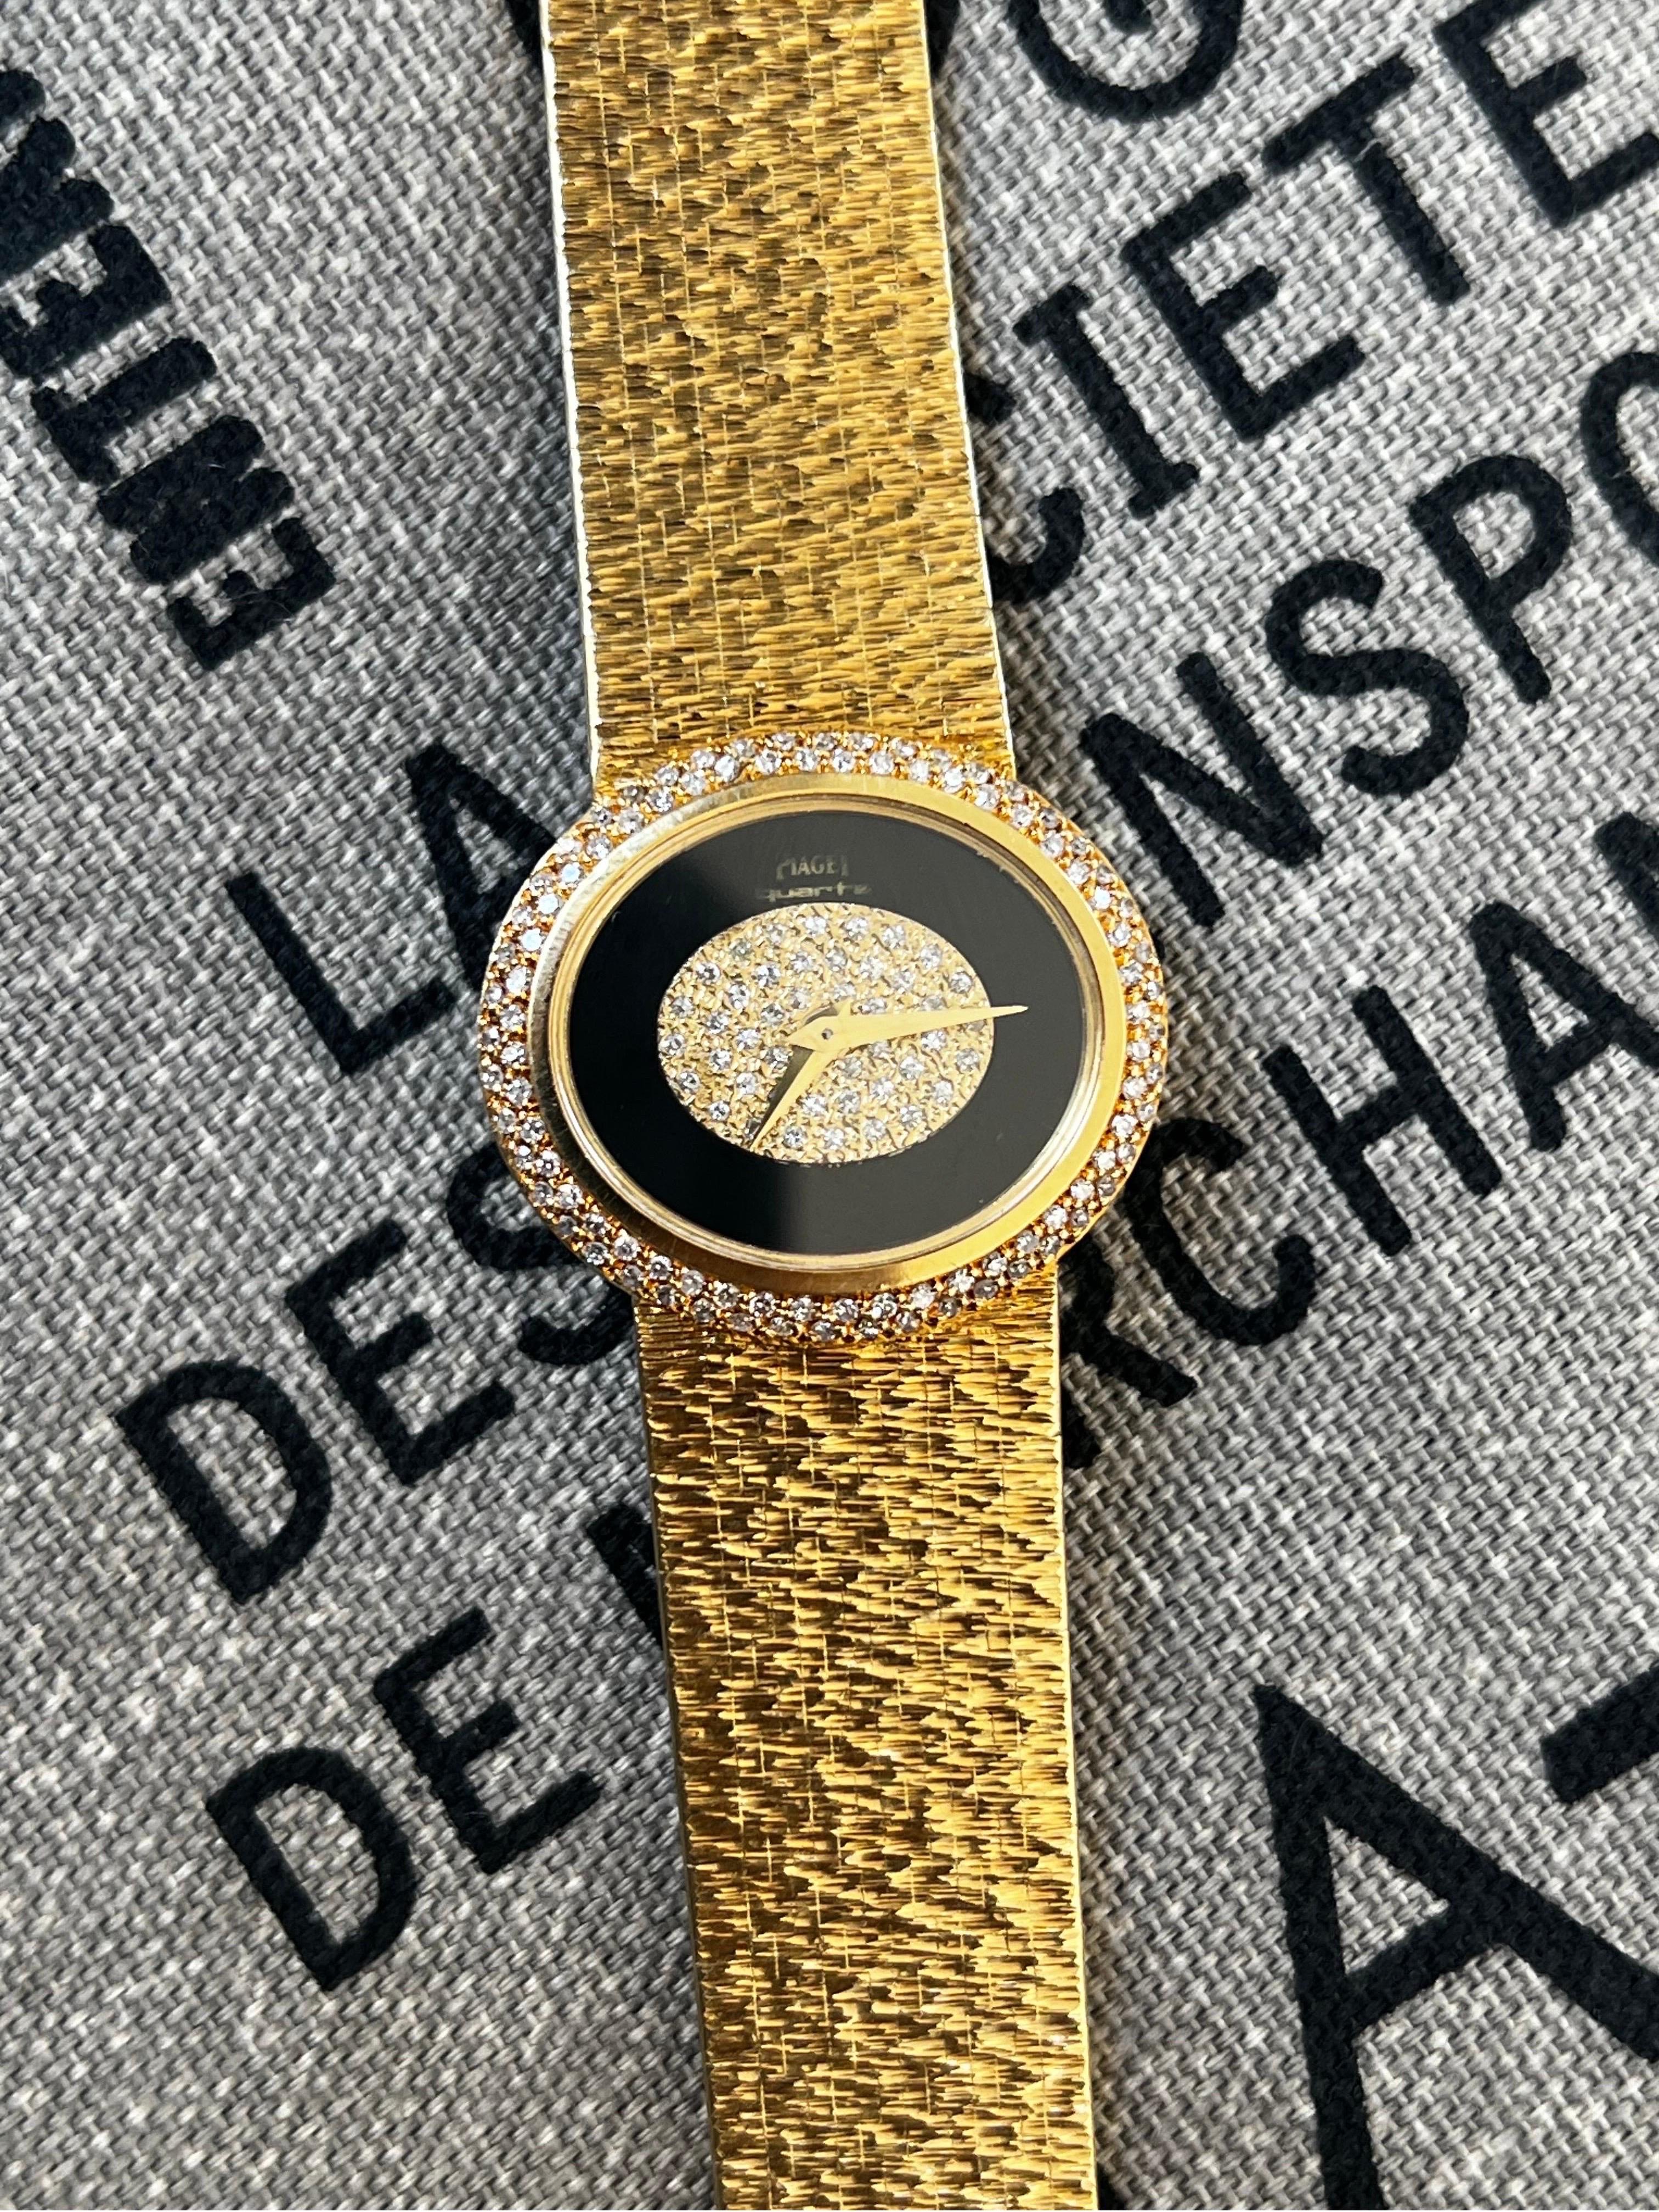 This 18K yellow gold Piaget ladies' wristwatch is a stunning timepiece with timeless elegance. Crafted with precision, this watch is a true testament to Piaget's expertise in the art of watchmaking. It features an analog display and is perfect for